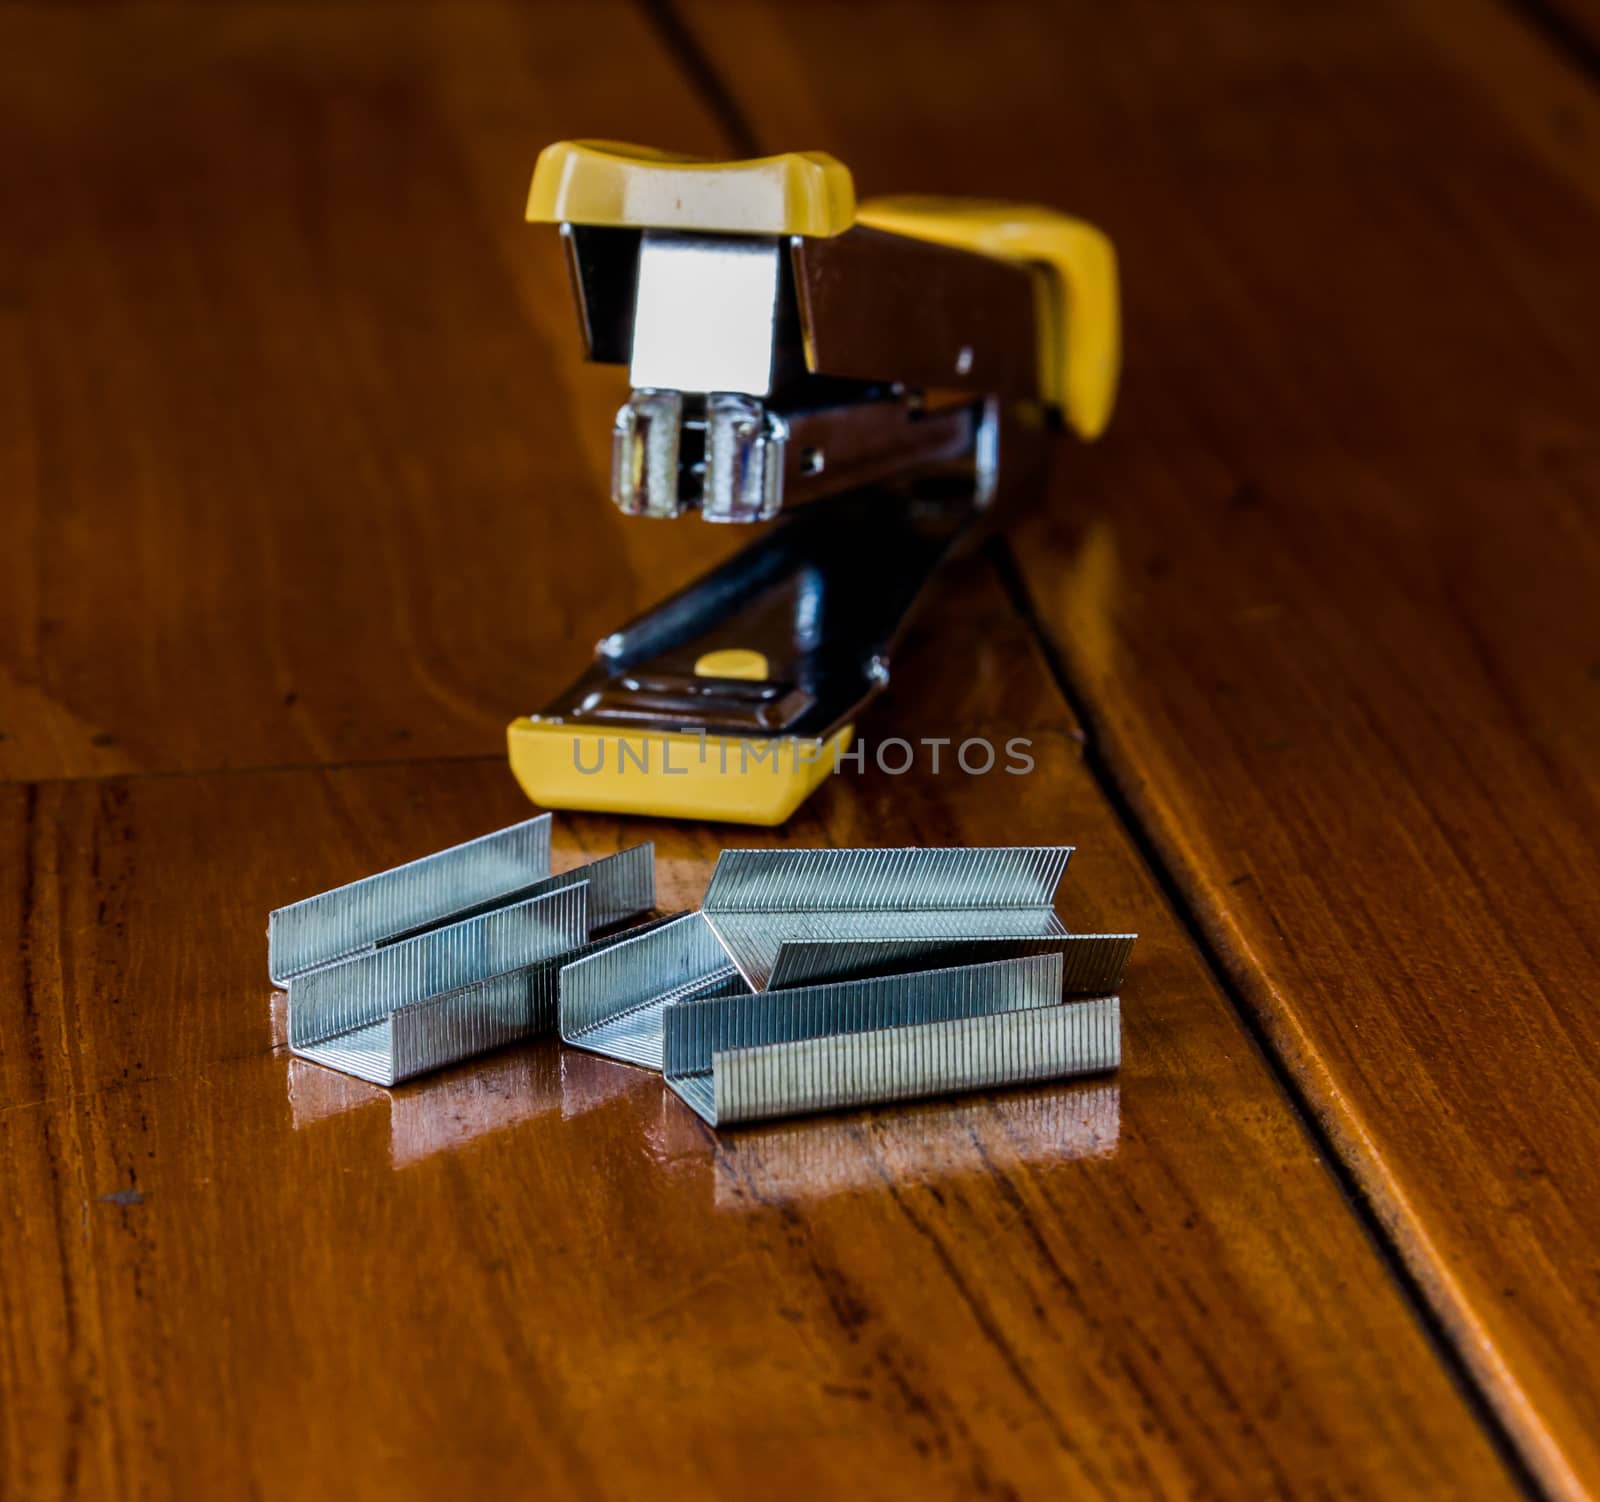 Stapler is on the wood.Focus on an object in the foreground of the picture.